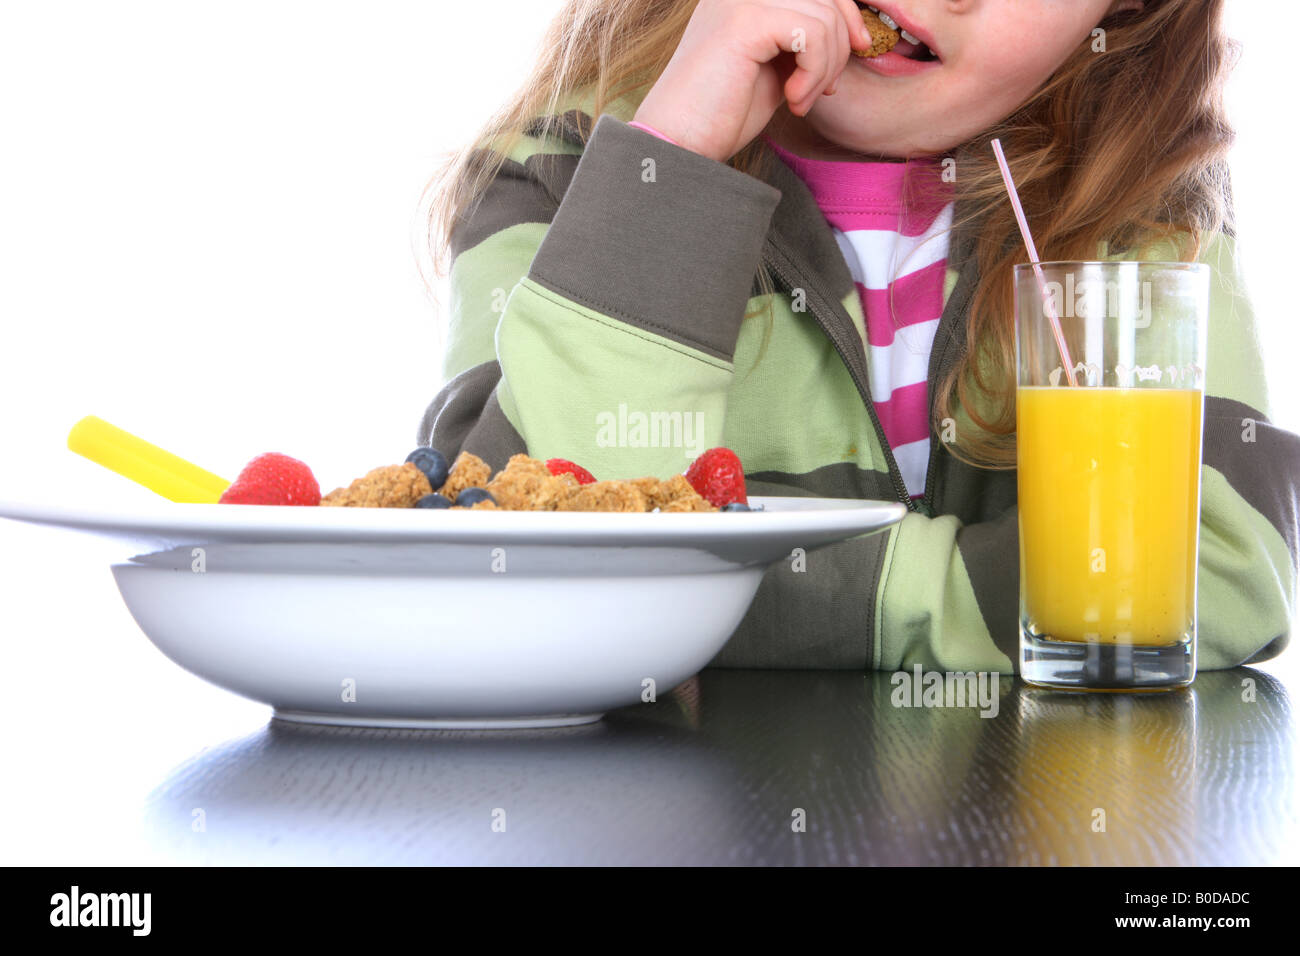 Young Woman Eating Breakfast Model Released Stock Photo